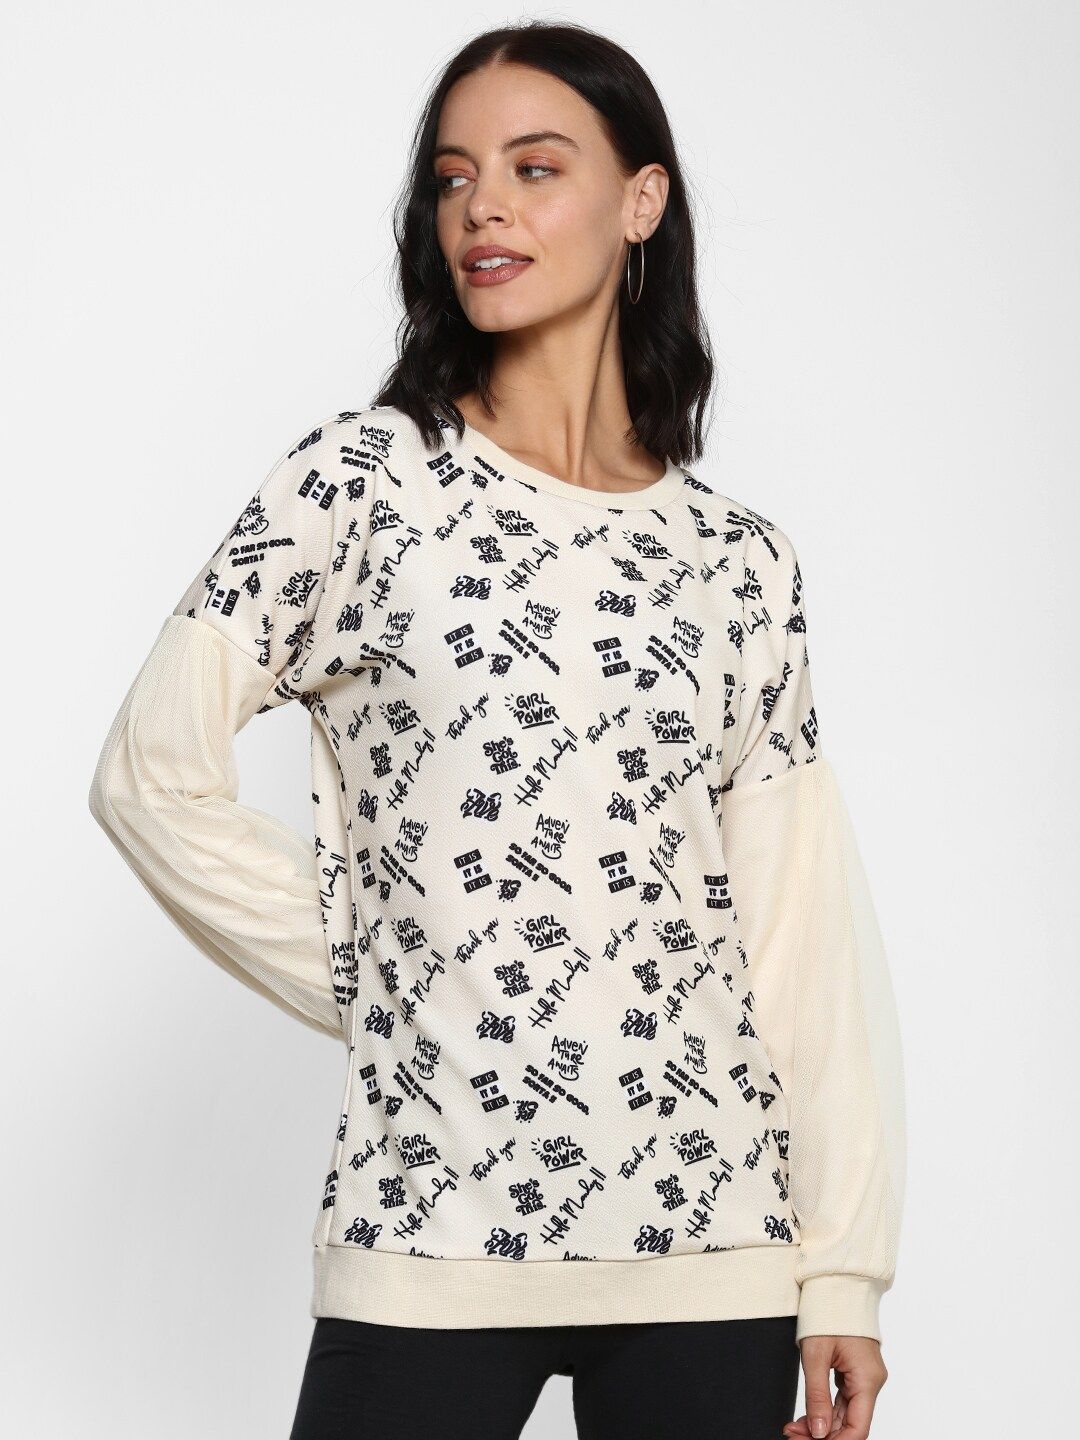 FOREVER 21 Women Off-White Printed Pullover Sweater Price in India